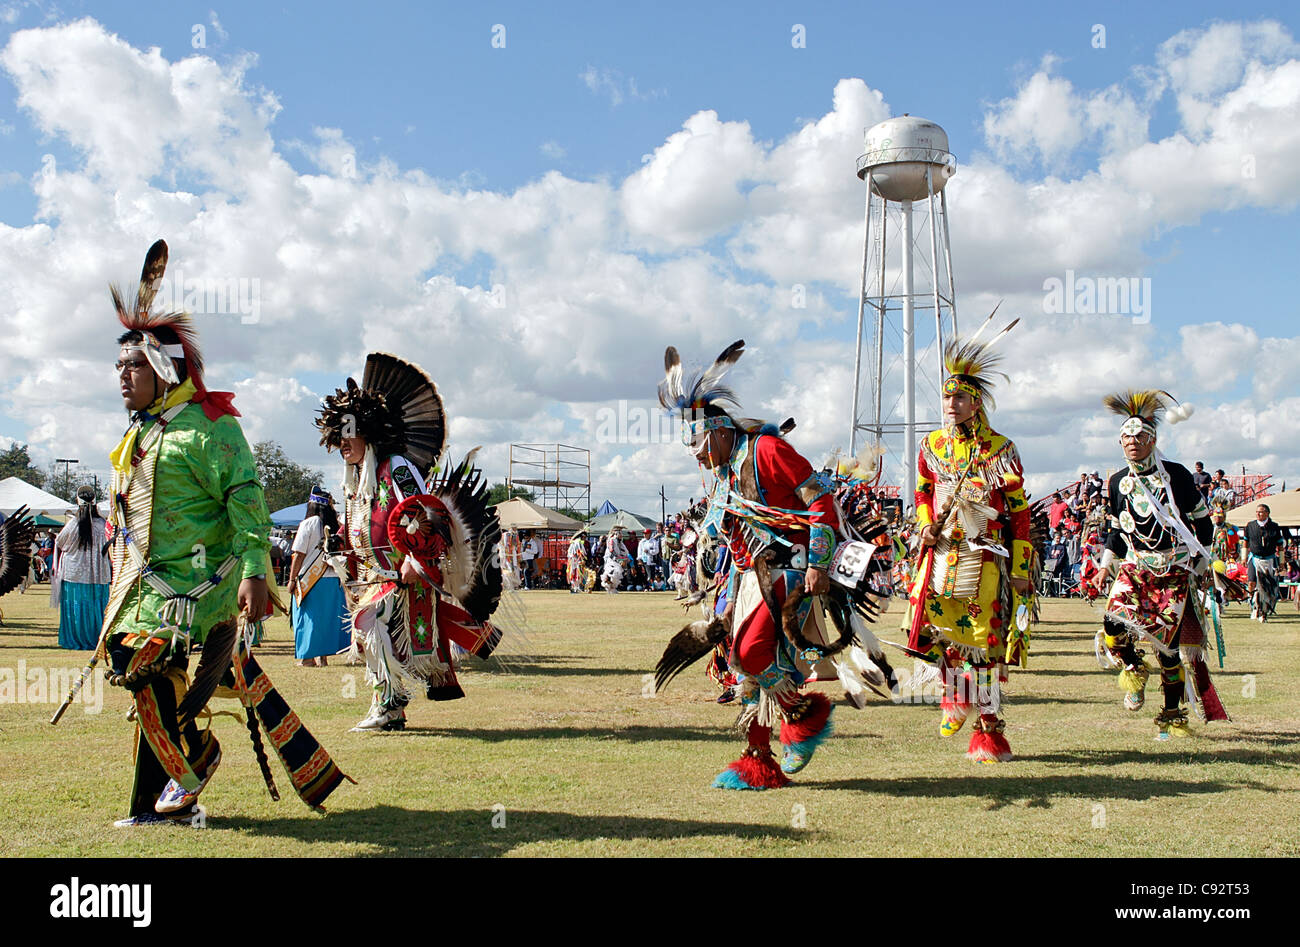 Scottsdale, Arizona - Participants in the inter-tribal Red Mountain Eagle Powwow held at the Pima-Maricopa Indian Community. Stock Photo